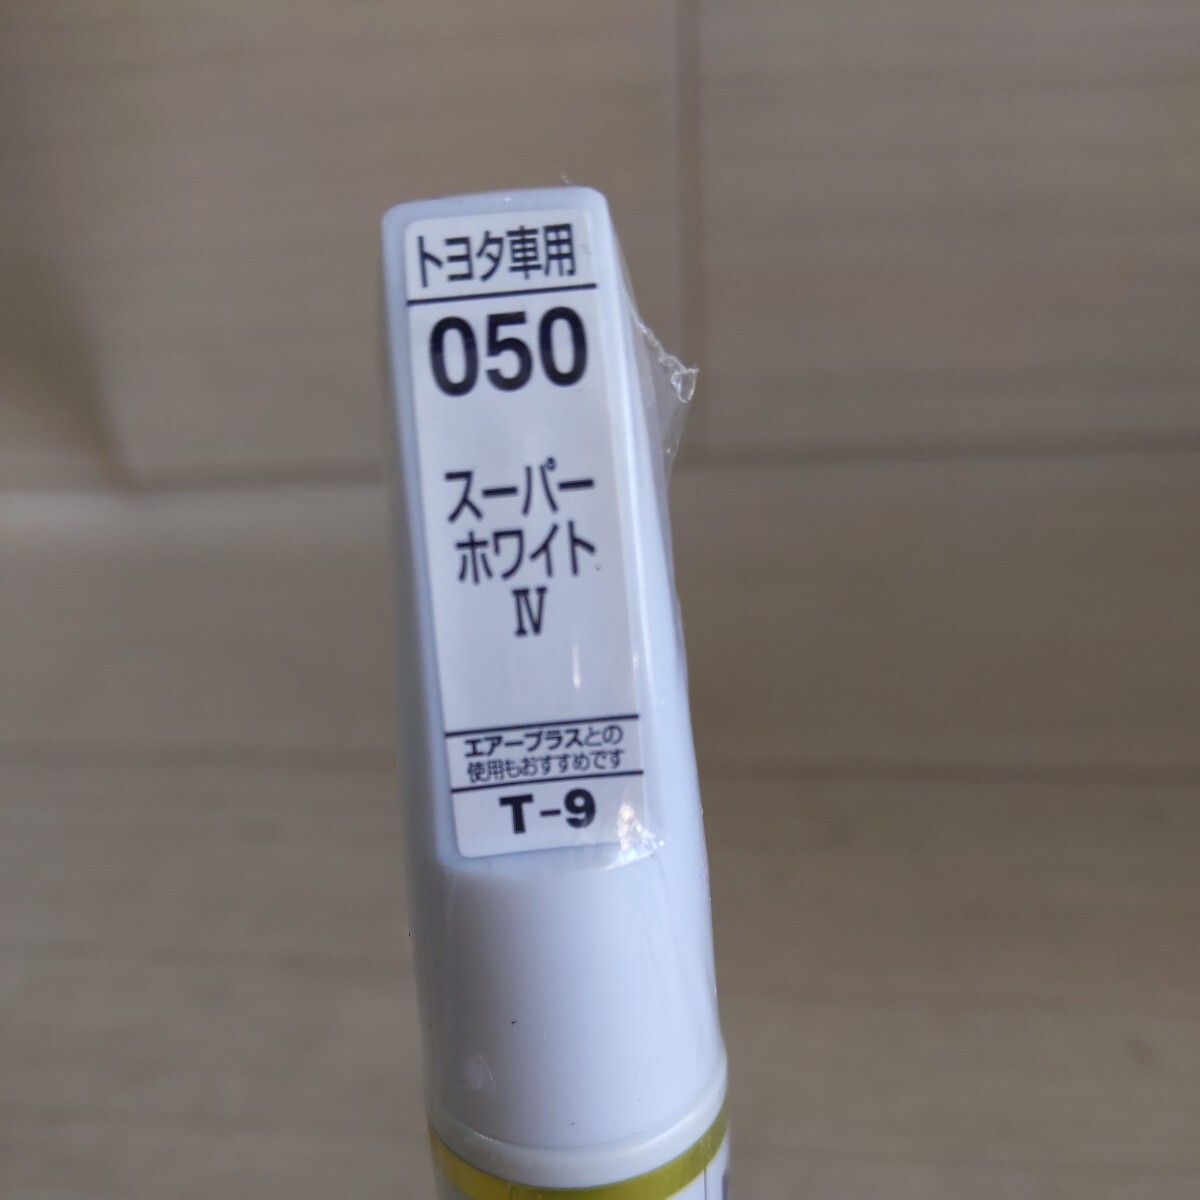 f20 ho rutsu original paints touch up repair pen color Touch Toyota car 050 super white 4 20ml Holts MH414 T-9 unused exhibition goods postage included 